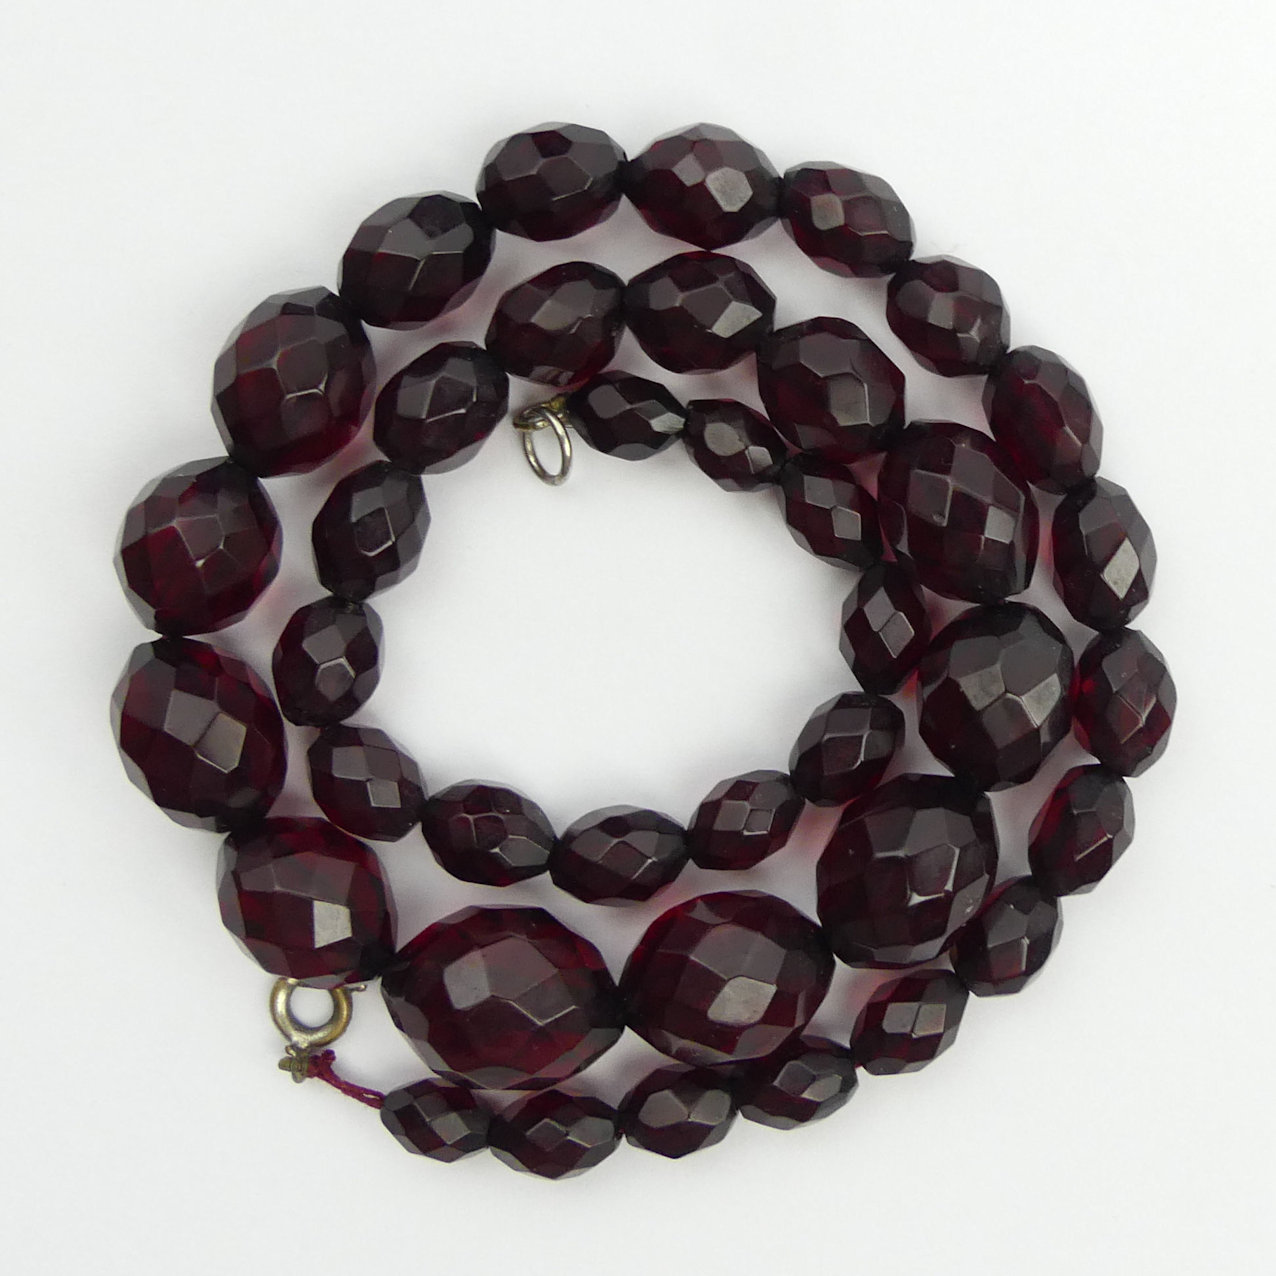 Cherry amber, Bakelite faceted bead necklace, 28.6 grams, 14mm x 19mm largest bead, 48cm long. UK